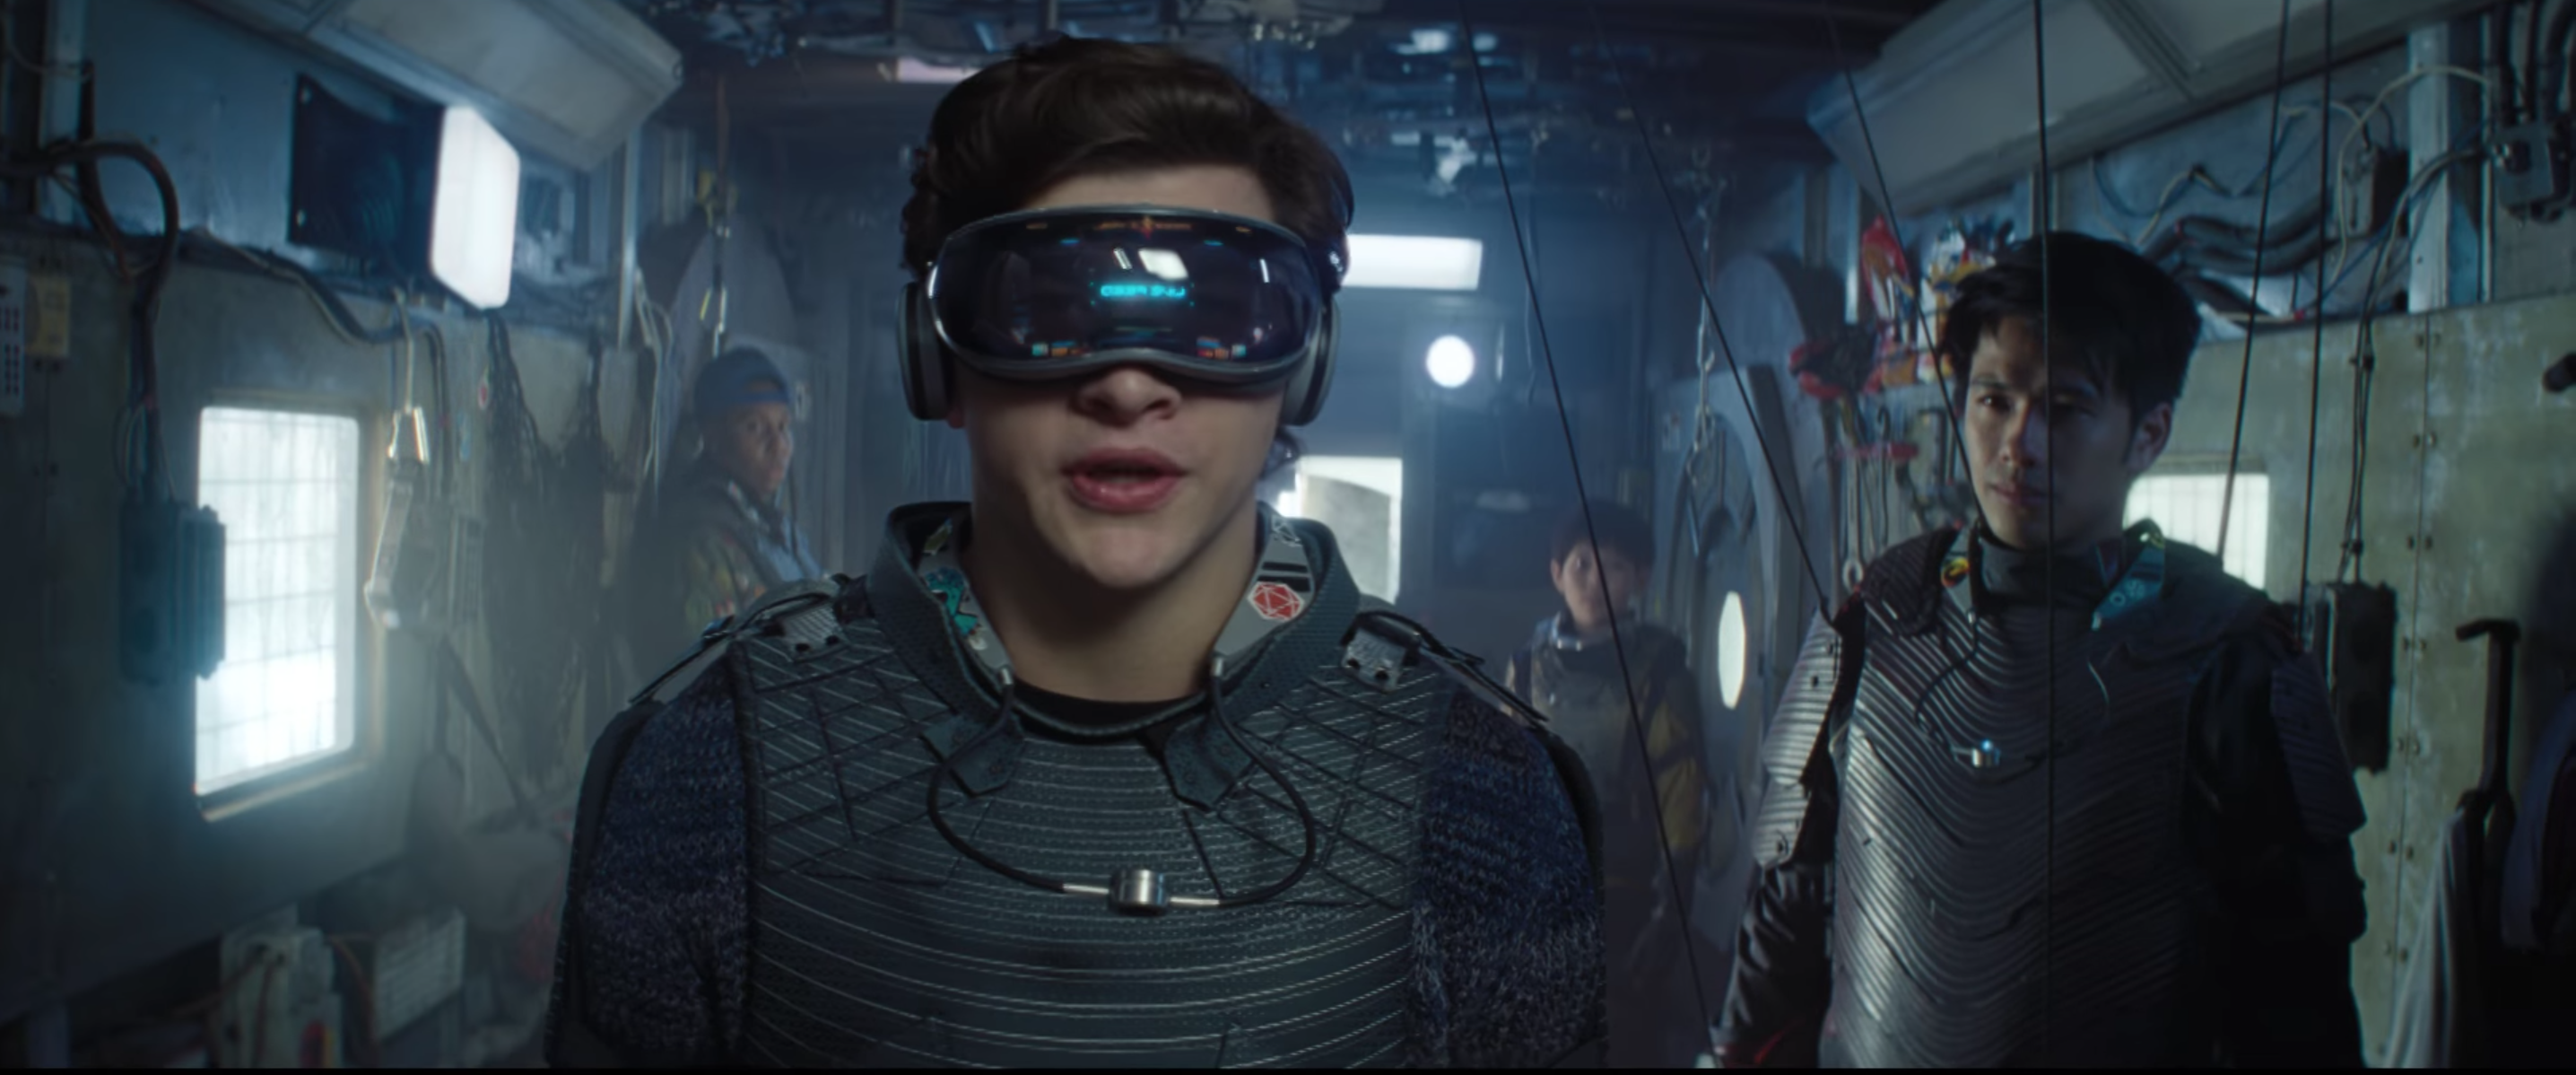 køkken orkester Distrahere Ready Player One's Easter eggs and pop culture references